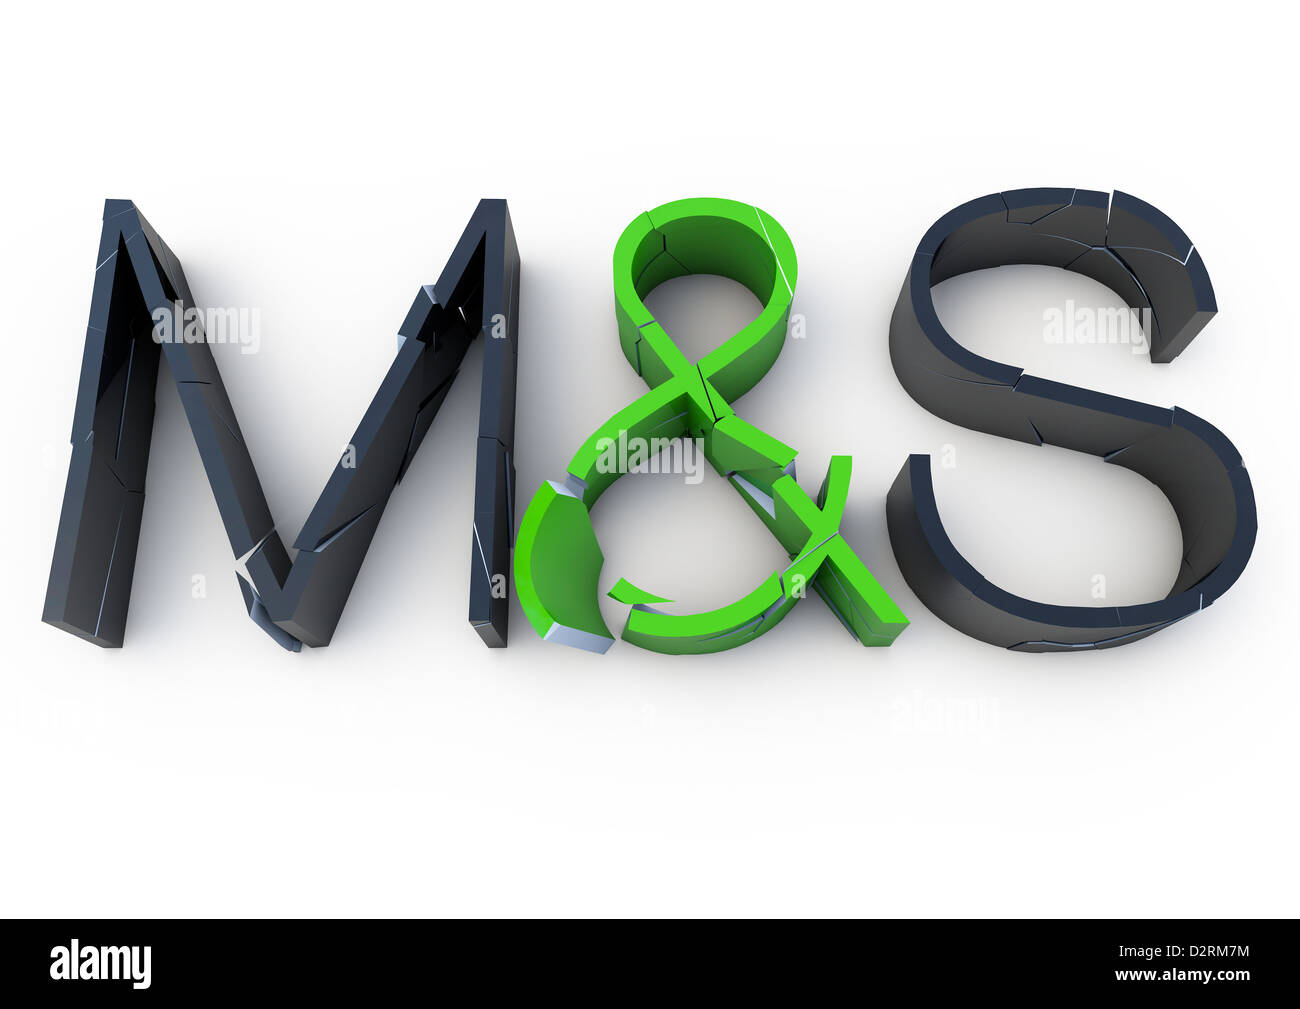 MARKS AND SPENCER LOGO cracking and crumbling  - Concept image - White background Stock Photo